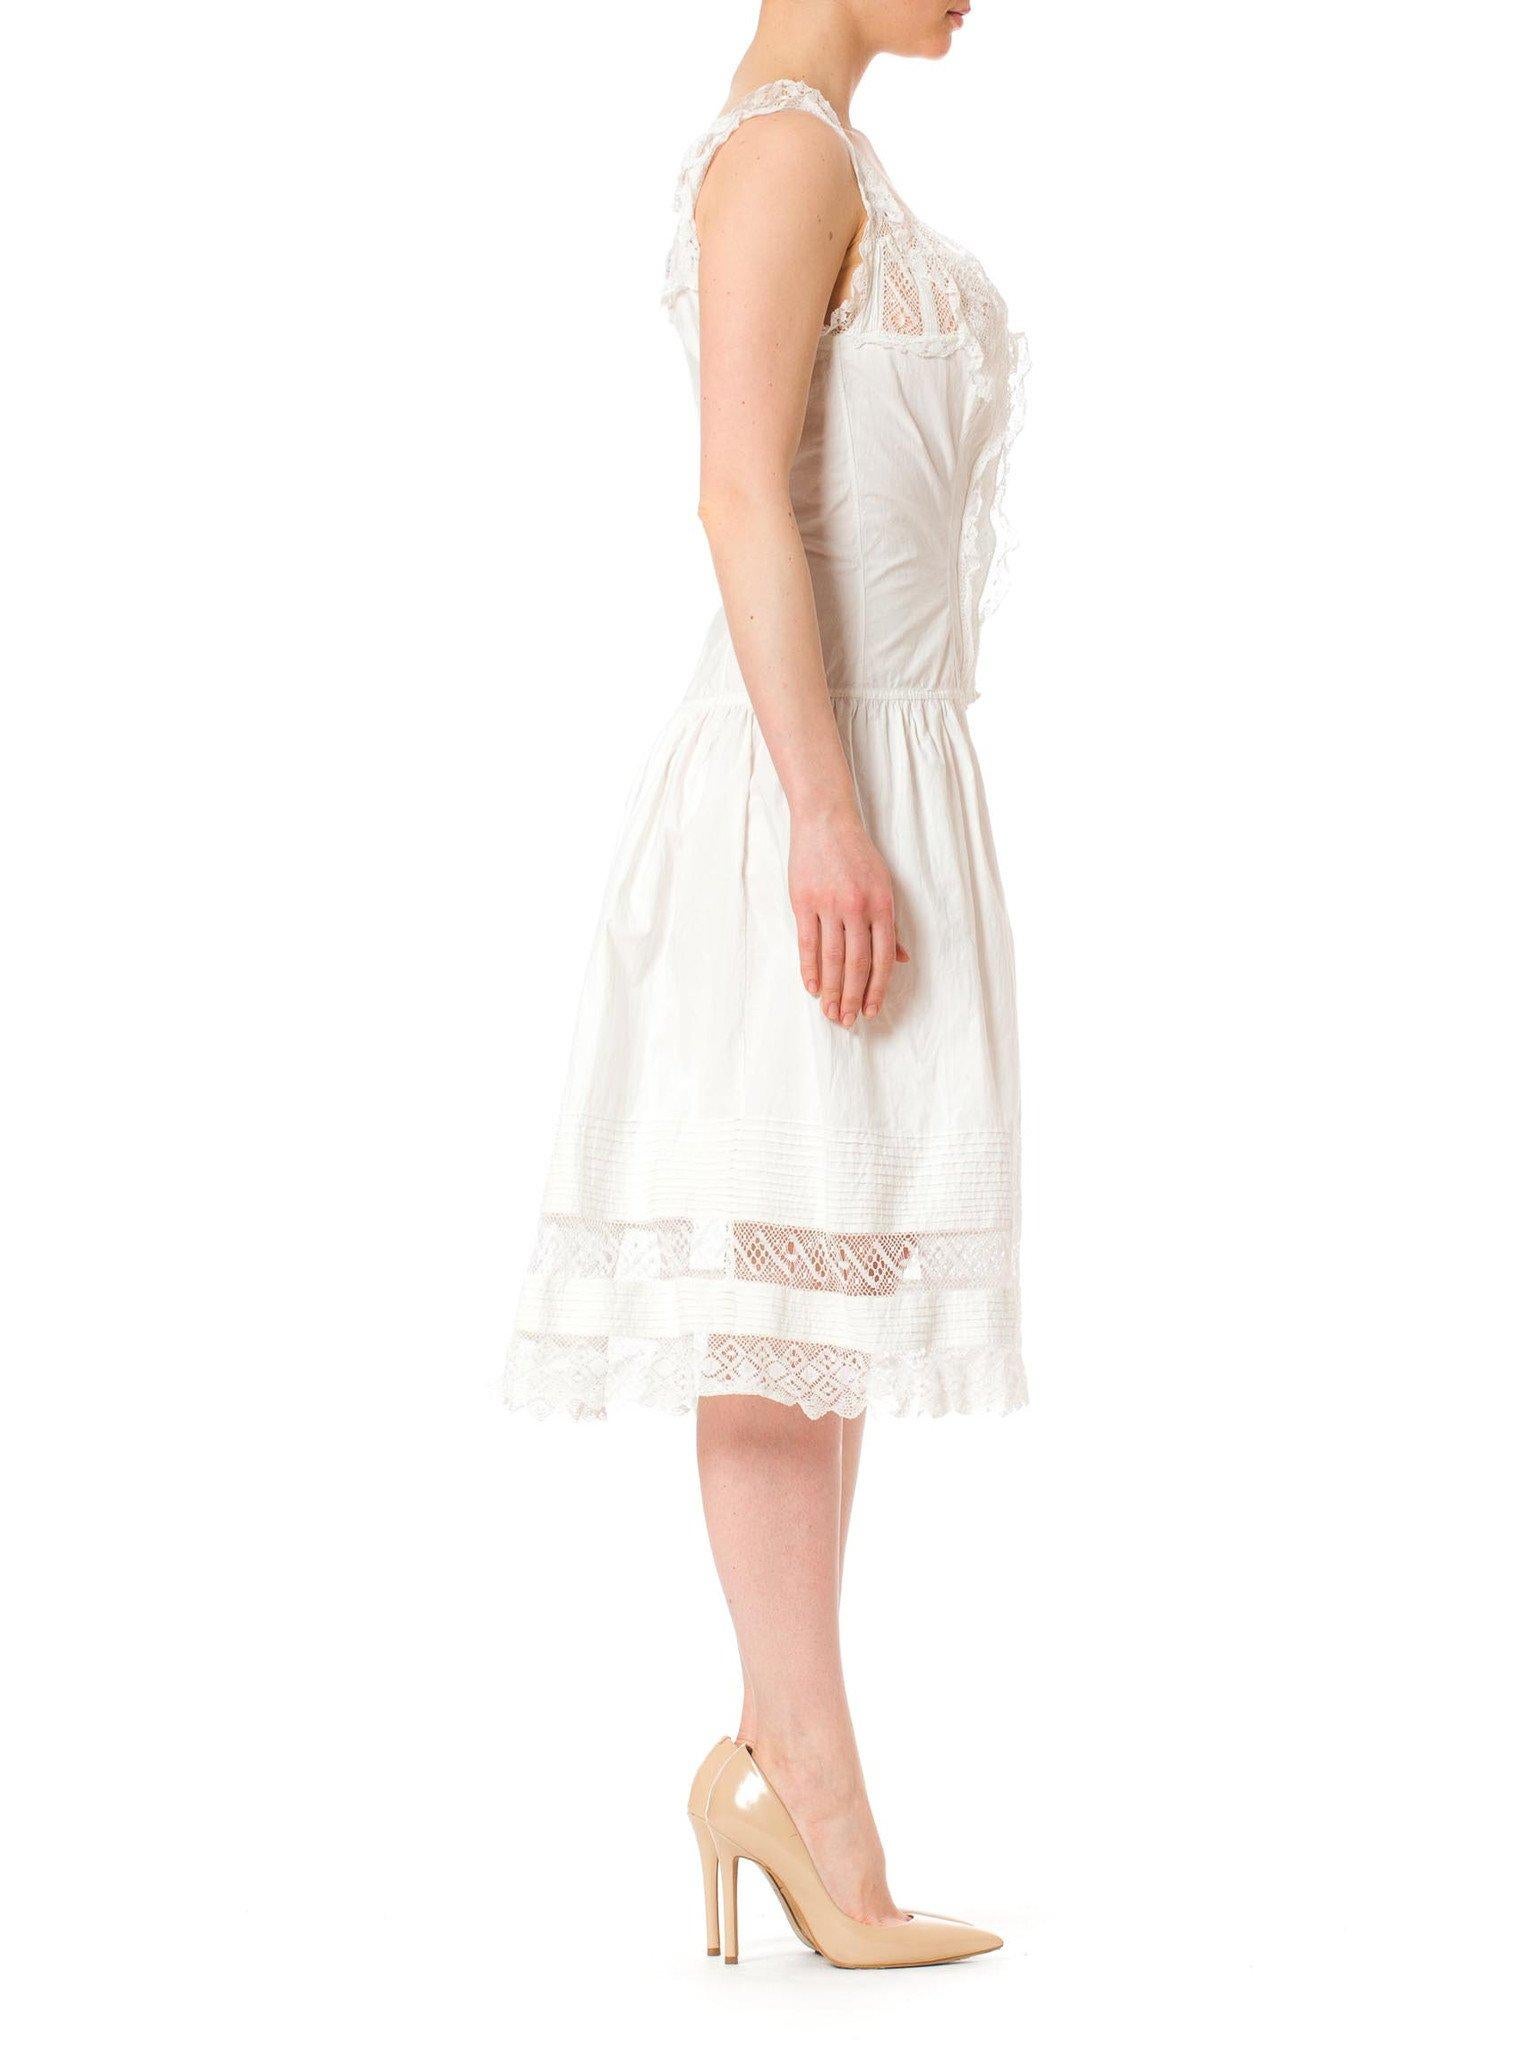 Women's Victorian White Organic Cotton & Handmade Lace Chemise Corset Cover Dress For Sale